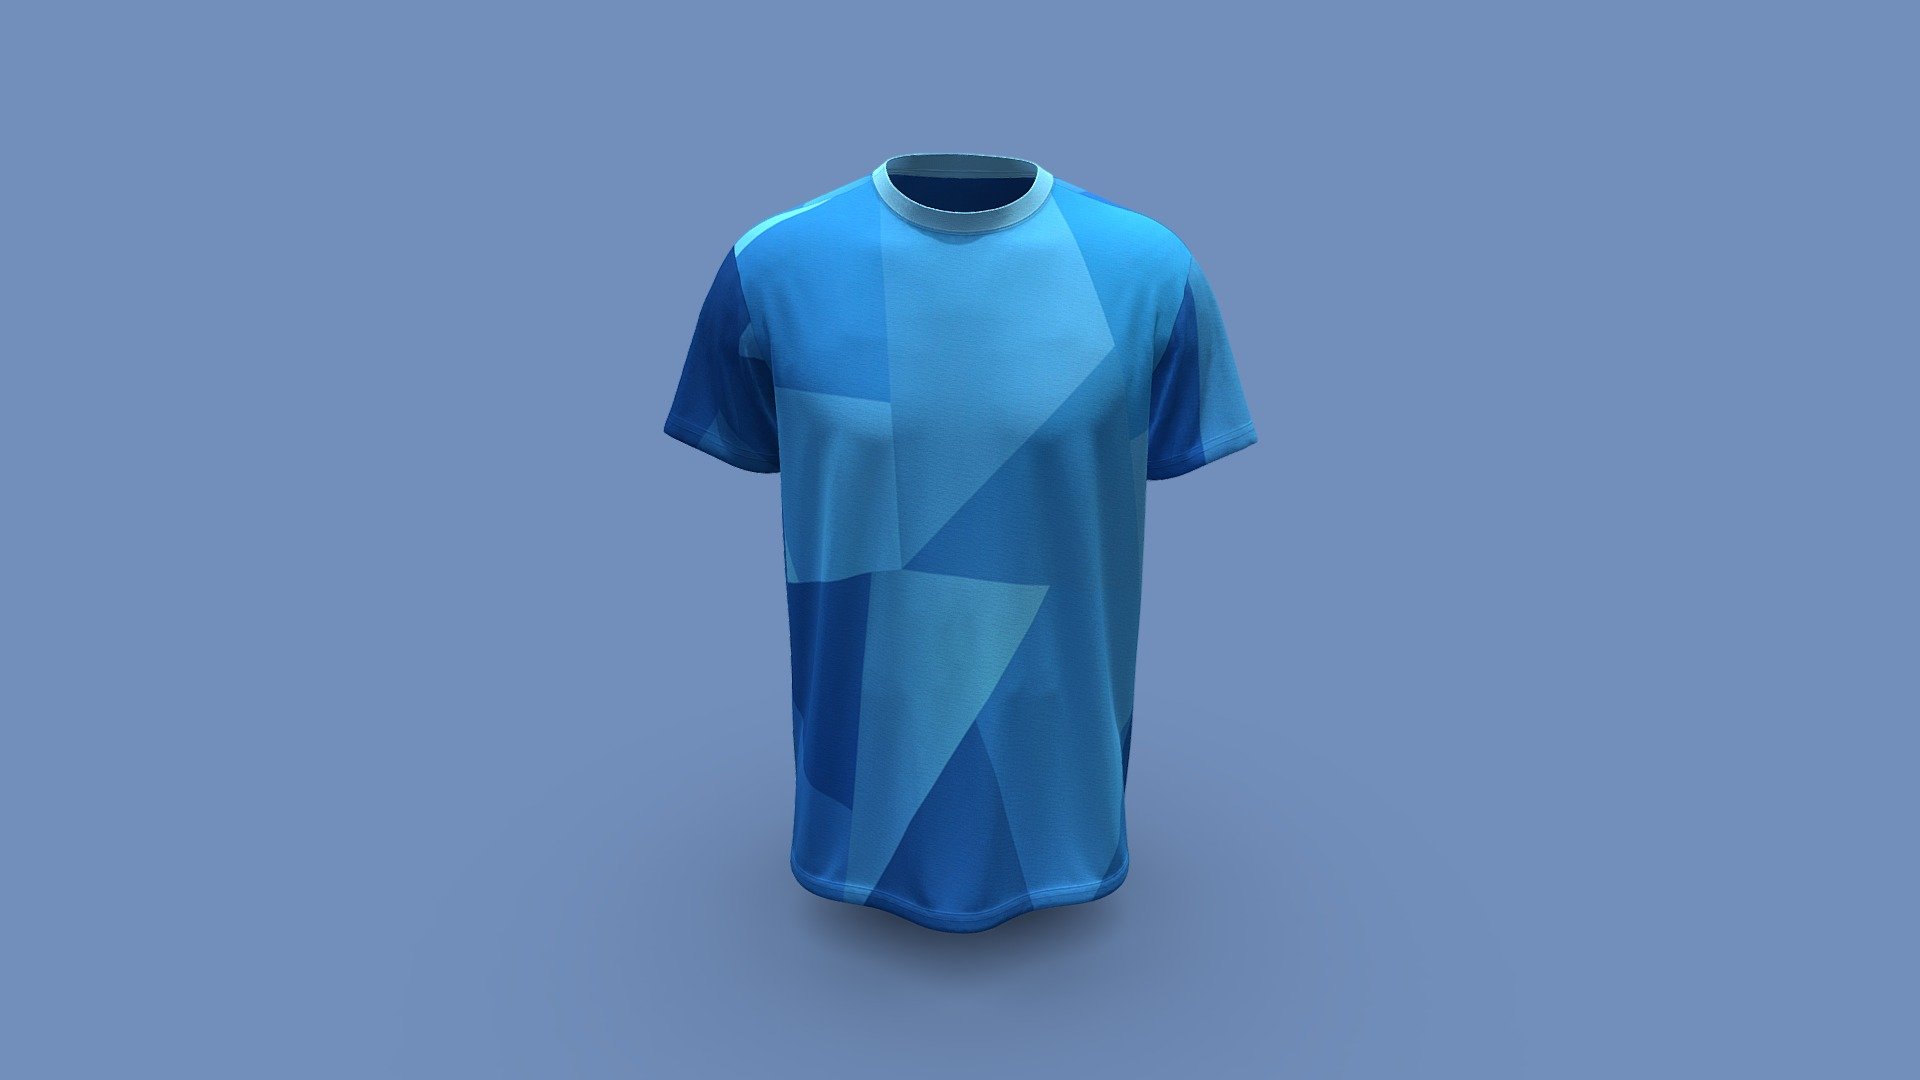 Cloth Title = 3D Art T- Shirt Clothing 
 
SKU = DG100209 

Category = Unisex
 
Product Type = T-Shirt 

Cloth Length = Regular
 
Body Fit = Loose Fit
 
Occasion = Casual 
 
Sleeve Style = Set In Sleeve
  

Our Services:

3D Apparel Design.

OBJ,FBX,GLTF Making with High/Low Poly.

Fabric Digitalization.

Mockup making.

3D Teck Pack.

Pattern Making.

2D Illustration.

Cloth Animation and 360 Spin Video.


Contact us:- 

Email: info@digitalfashionwear.com 

Website: https://digitalfashionwear.com 


We designed all the types of cloth specially focused on product visualization, e-commerce, fitting, and production. 

We will design: 

T-shirts 

Polo shirts 

Hoodies 

Sweatshirt 

Jackets 

Shirts 

TankTops 

Trousers 

Bras 

Underwear 

Blazer 

Aprons 

Leggings 

and All Fashion items. 





Our goal is to make sure what we provide you, meets your demand 3d model